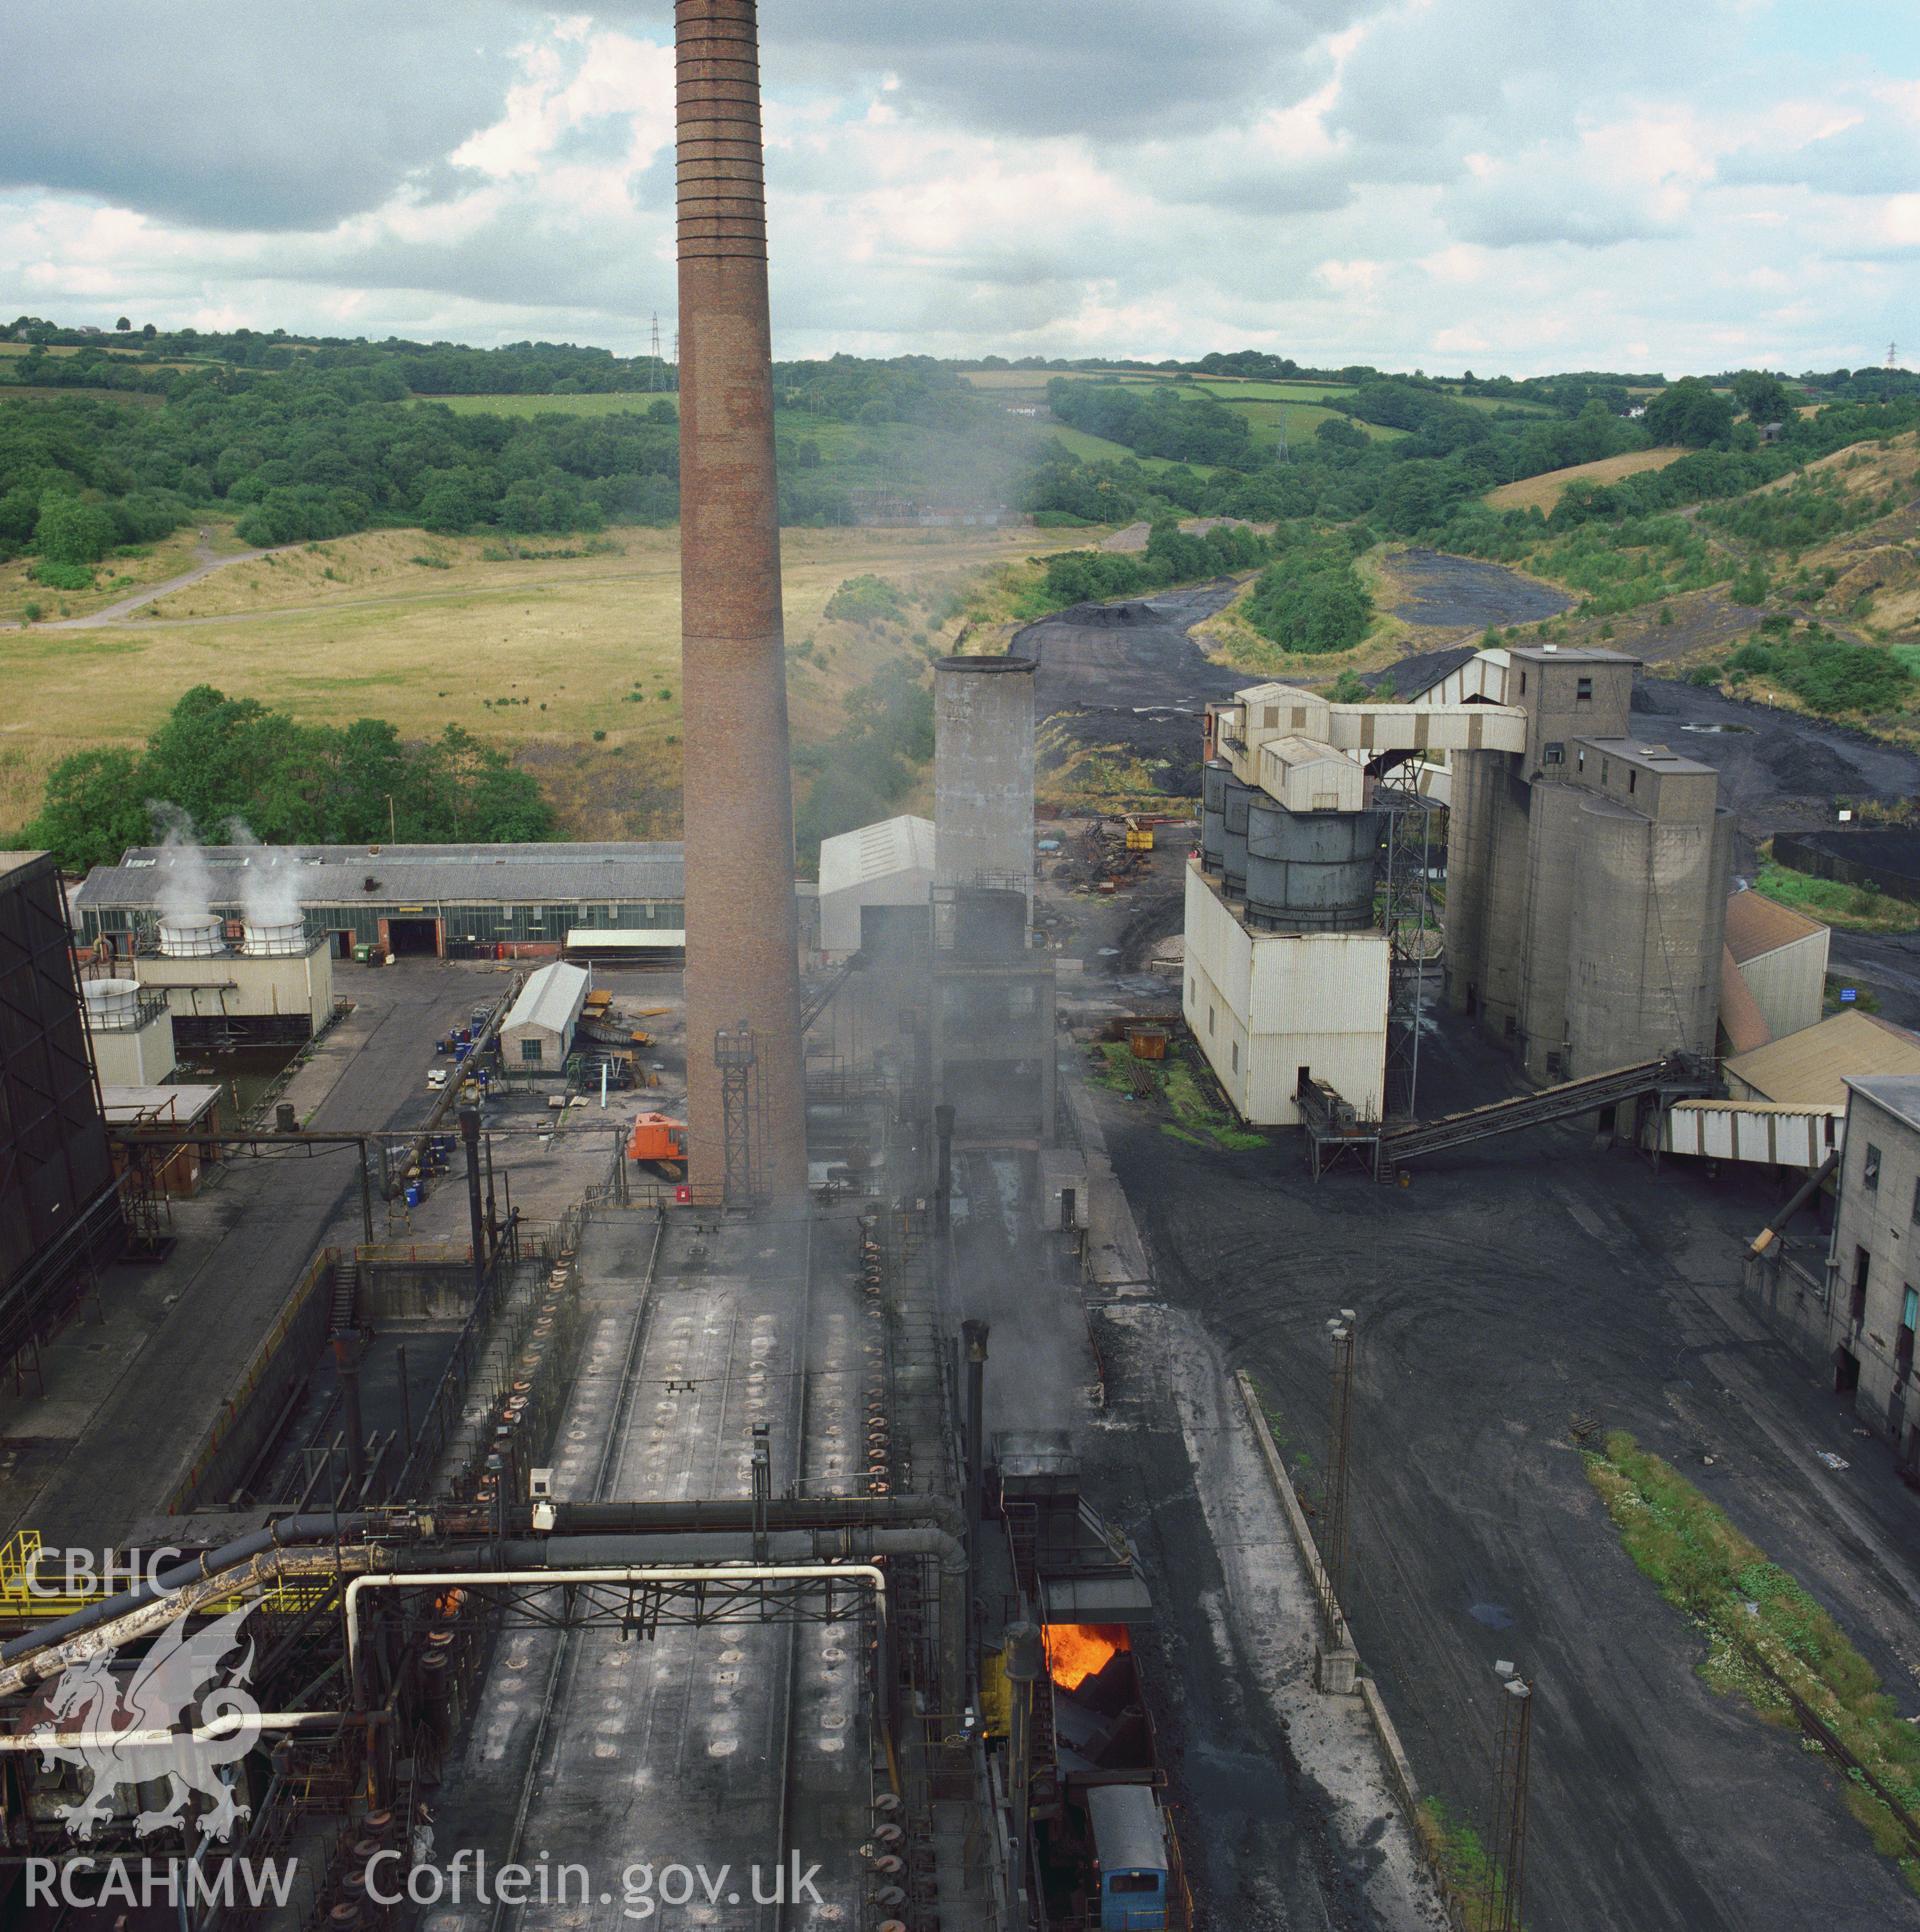 Colour transparency showing  view of Cwm Coking Works, Llantwit Farde, produced by FleurJames, 2005.